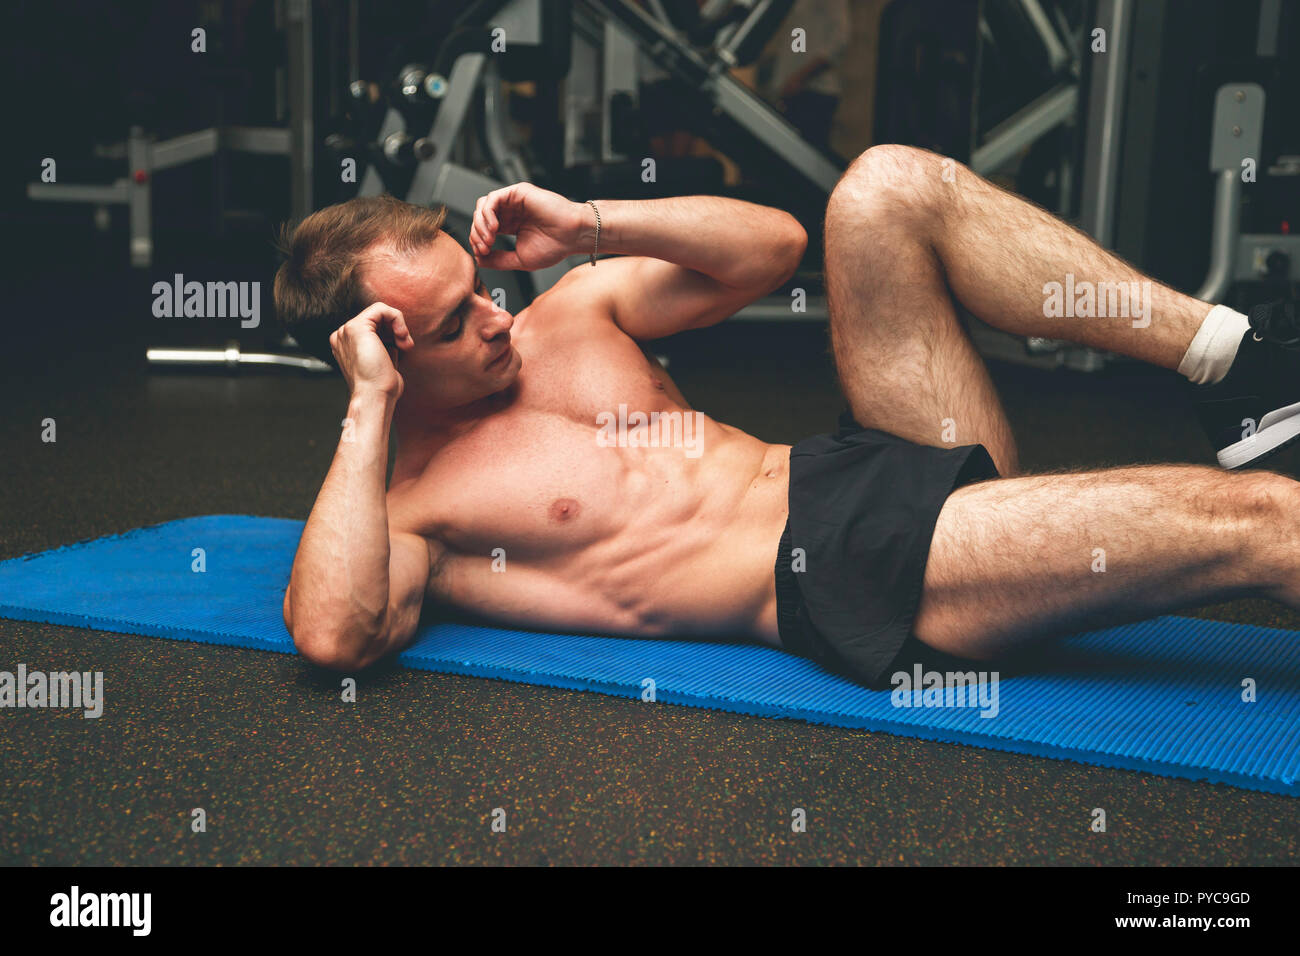 Muscular man on floor working out on abdominal muscles. Stock Photo